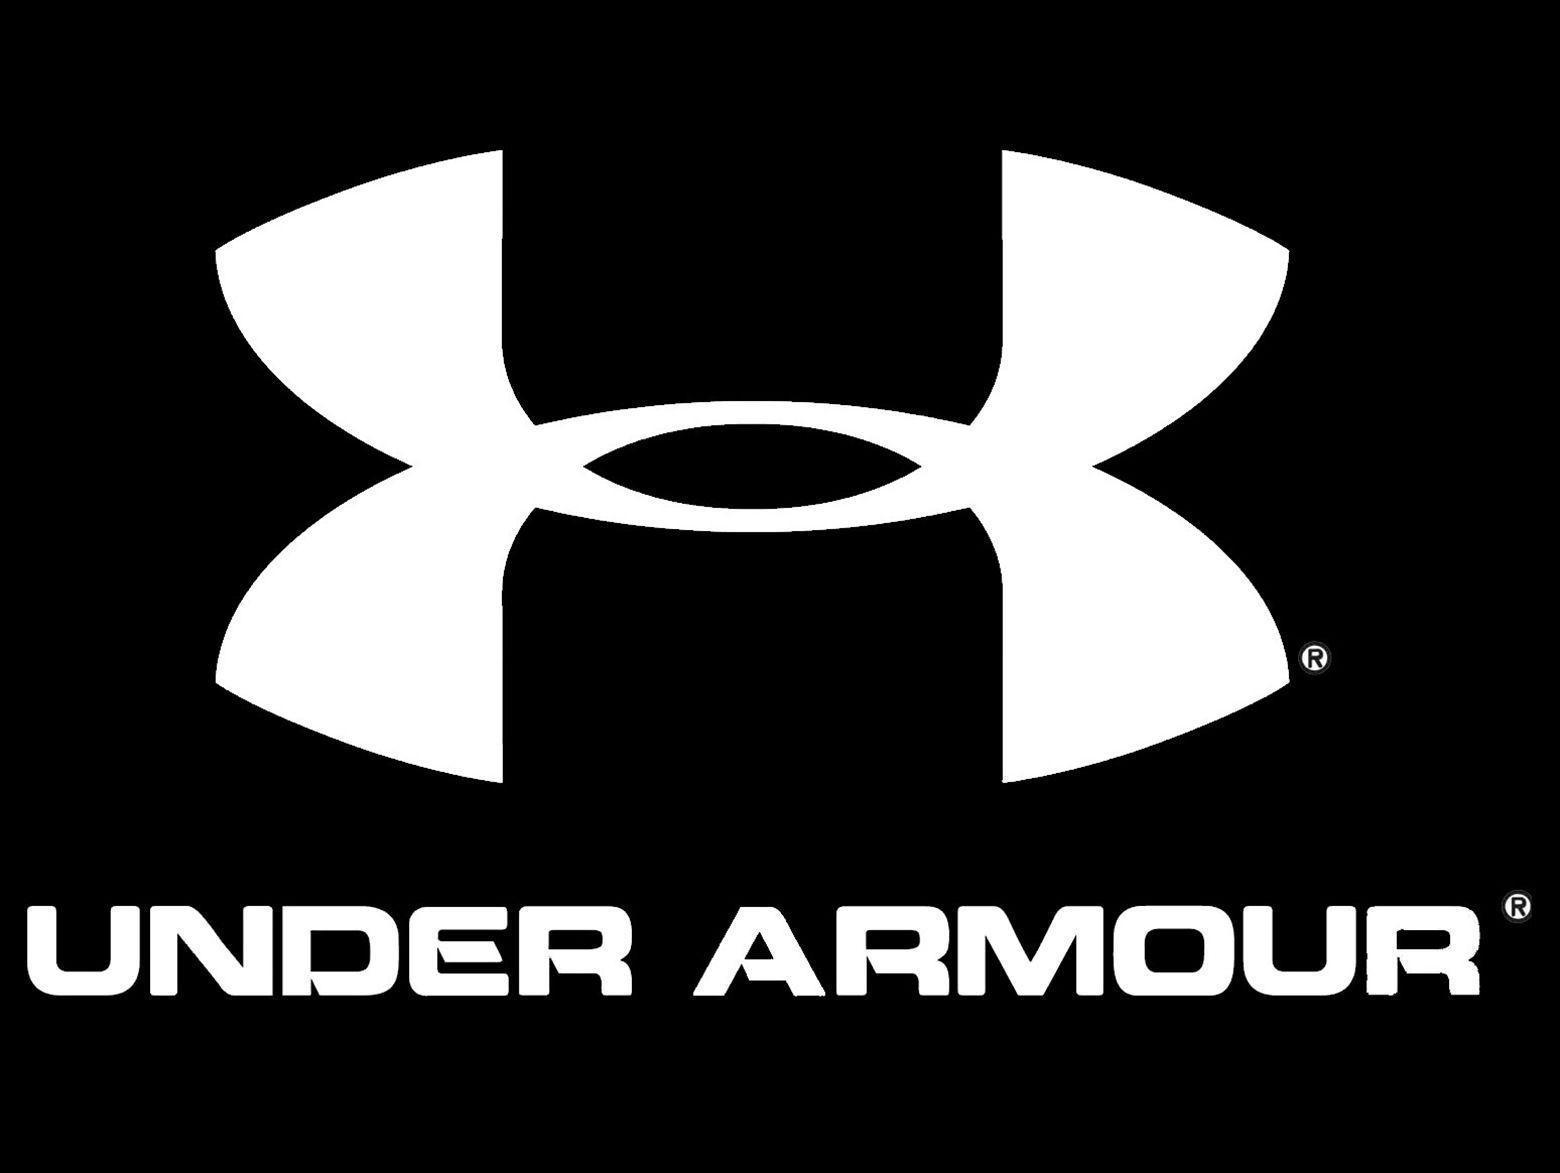 Under Armour ($UA) Stock. Surges 23% On Earnings Beat